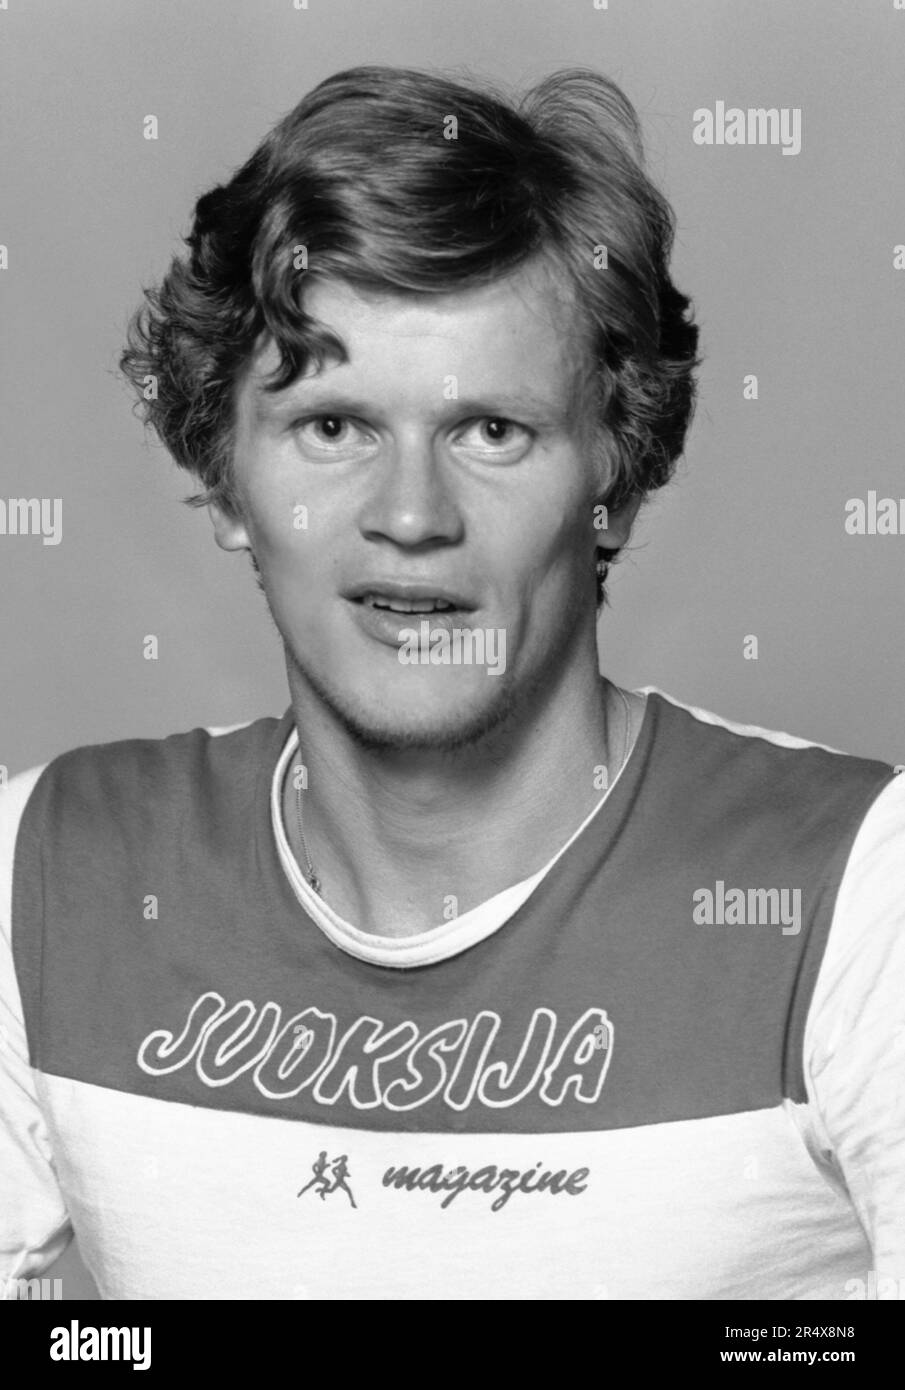 ISMO TOUKONEN Athlete in the finnish track and field team 3000m Stock Photo